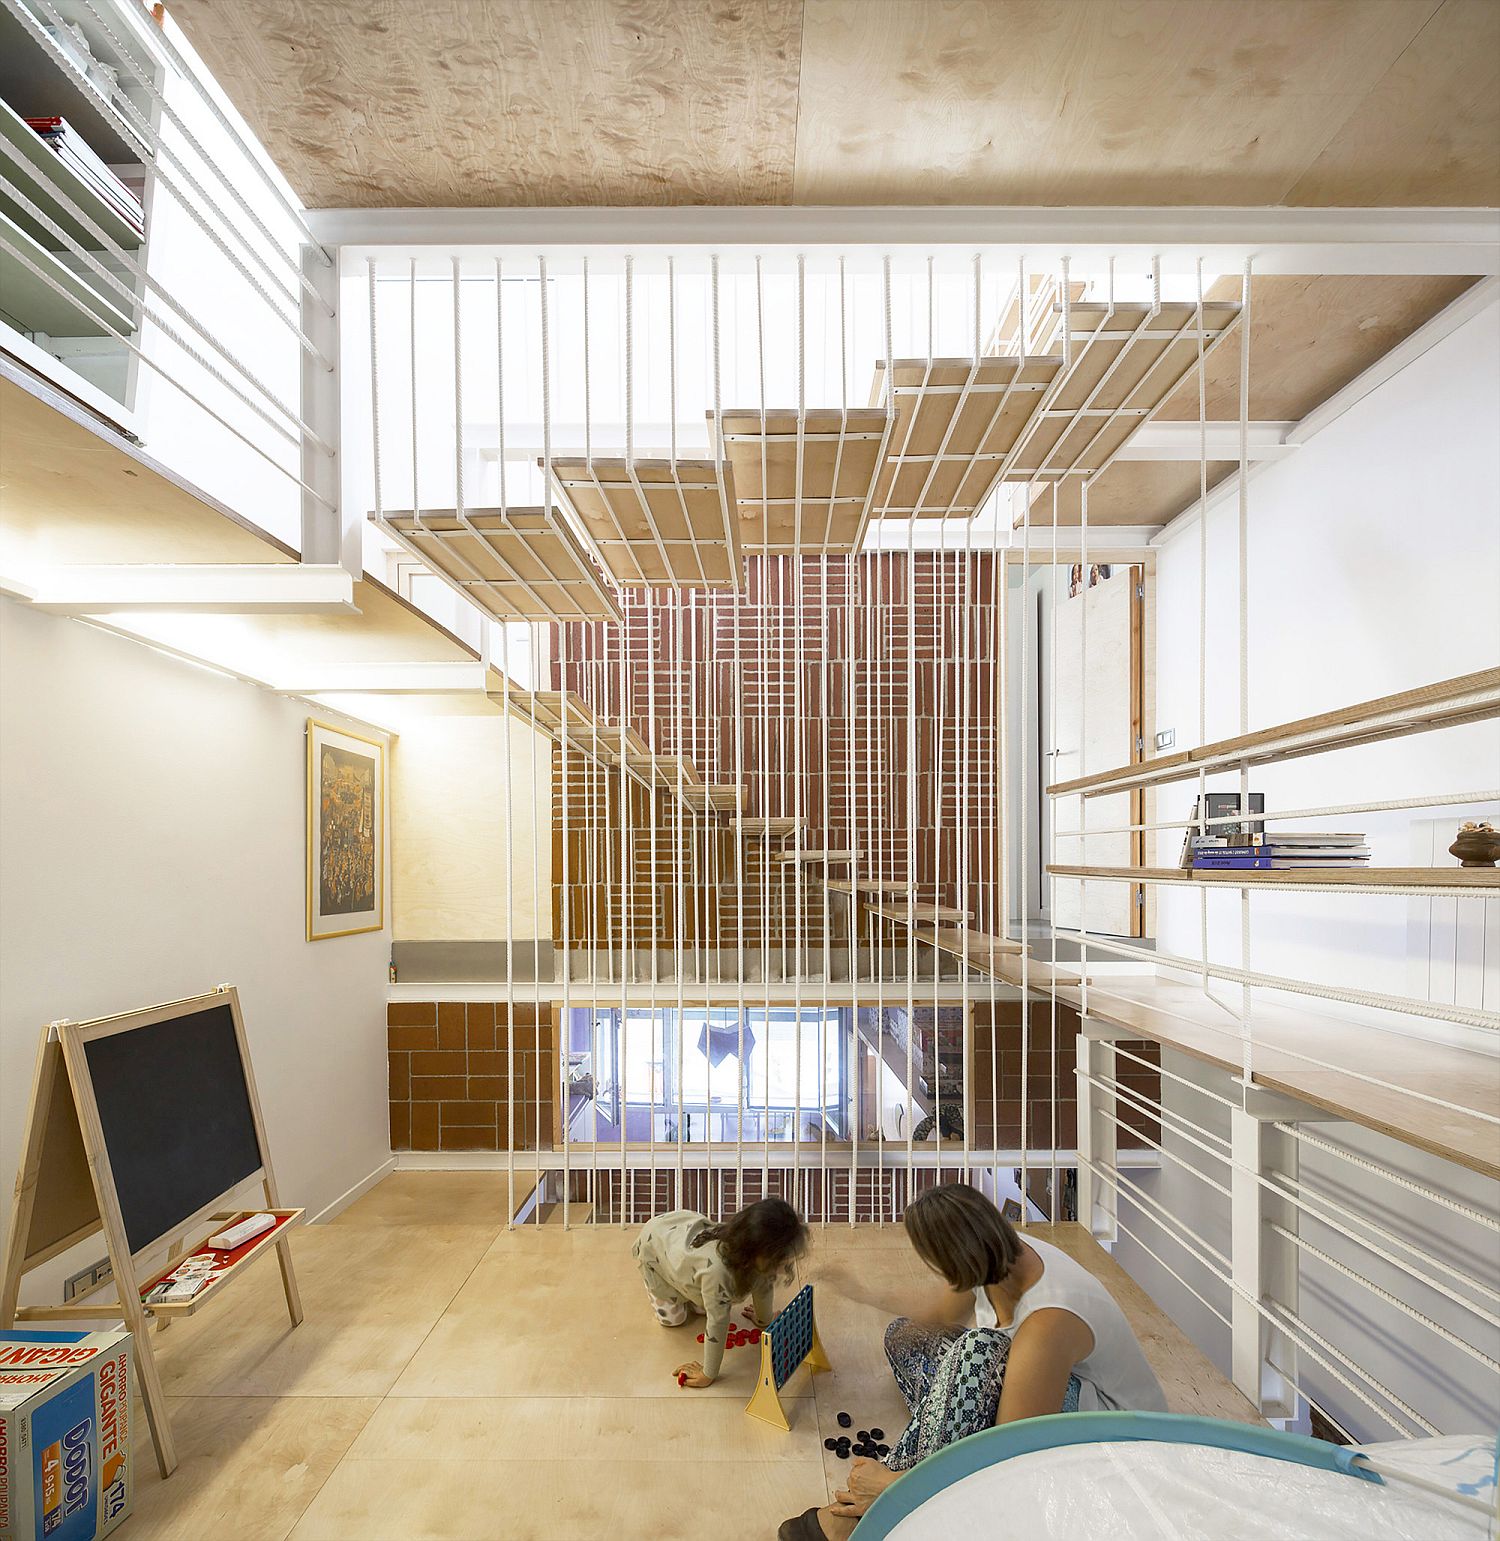 Kids-play-area-with-plenty-of-natural-light